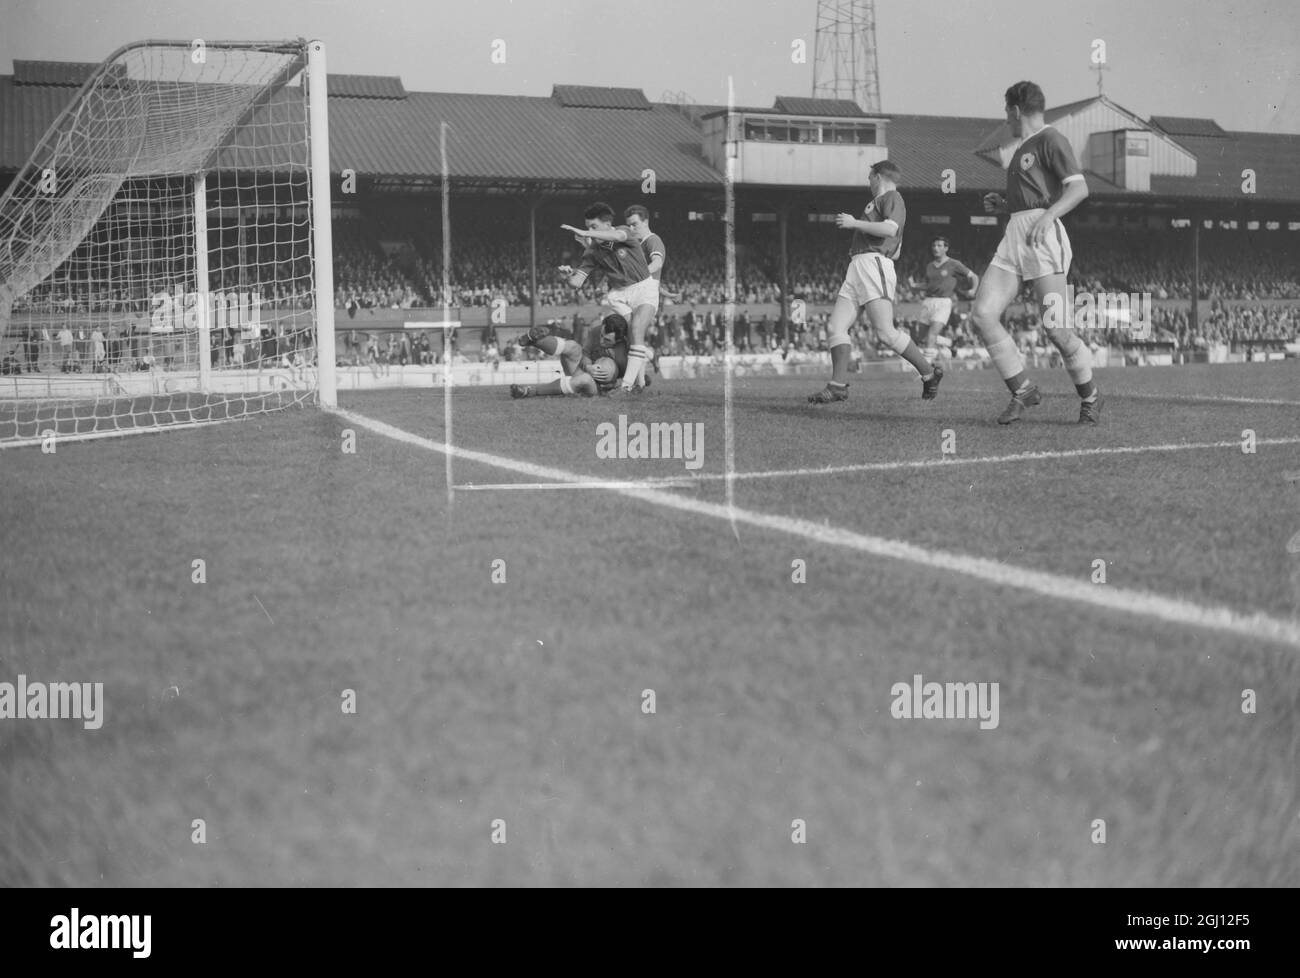 GOALKEEPER BANKS OF LEICESTER CITY FOOTBALL CLUB IN ACTION 14 OCTOBER 1961 Stock Photo